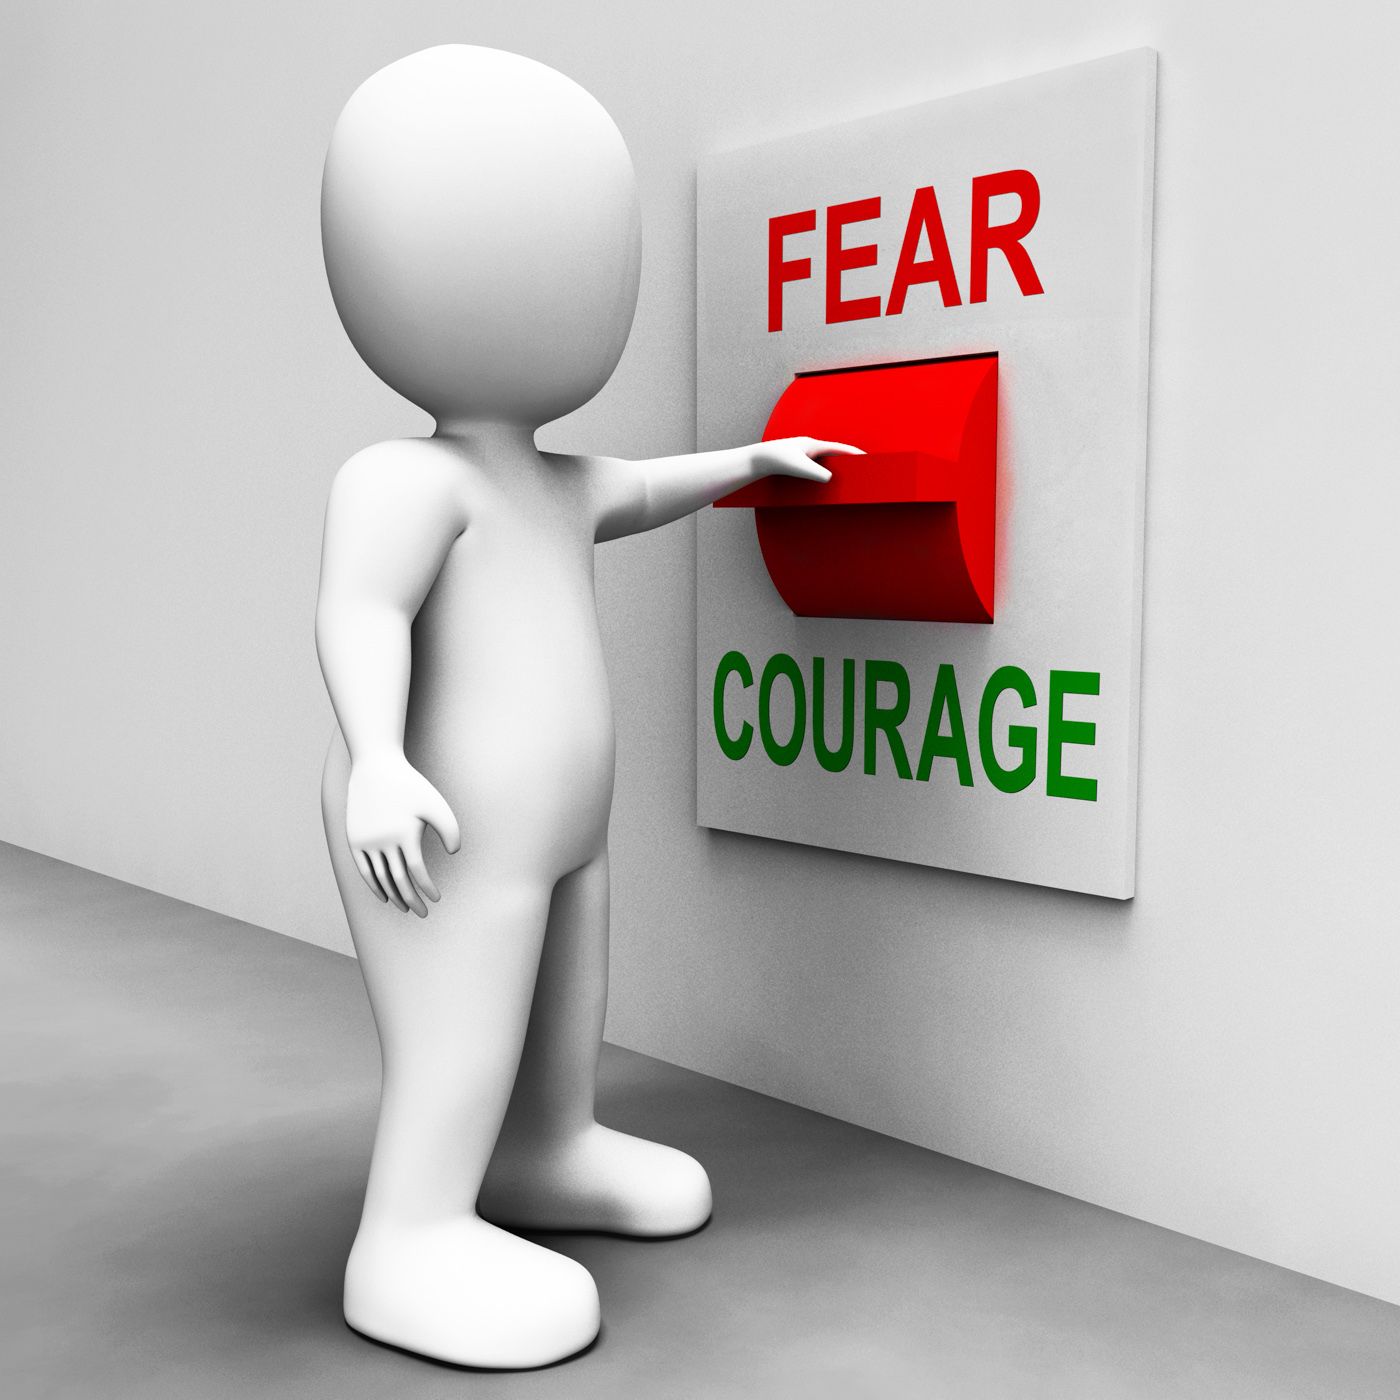 Courage fear switch shows afraid or bold photo